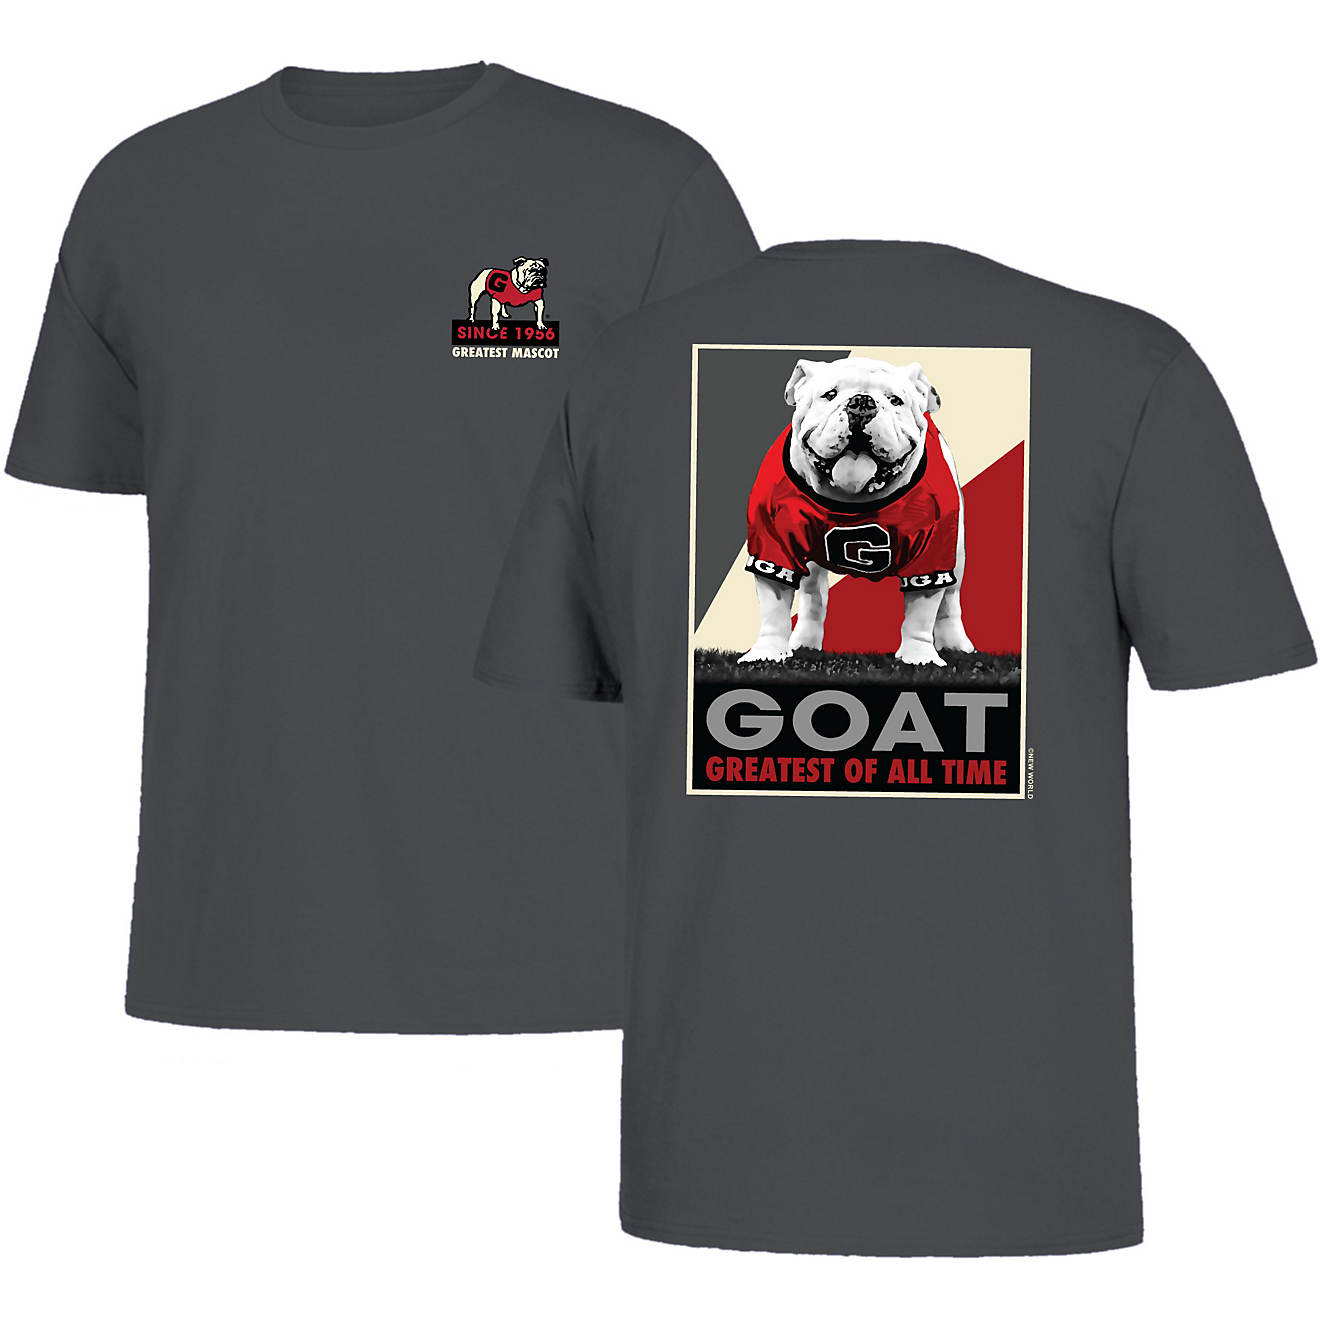 New World Graphics Men's University of Georgia G.O.A.T. T-shirt                                                                  - view number 1